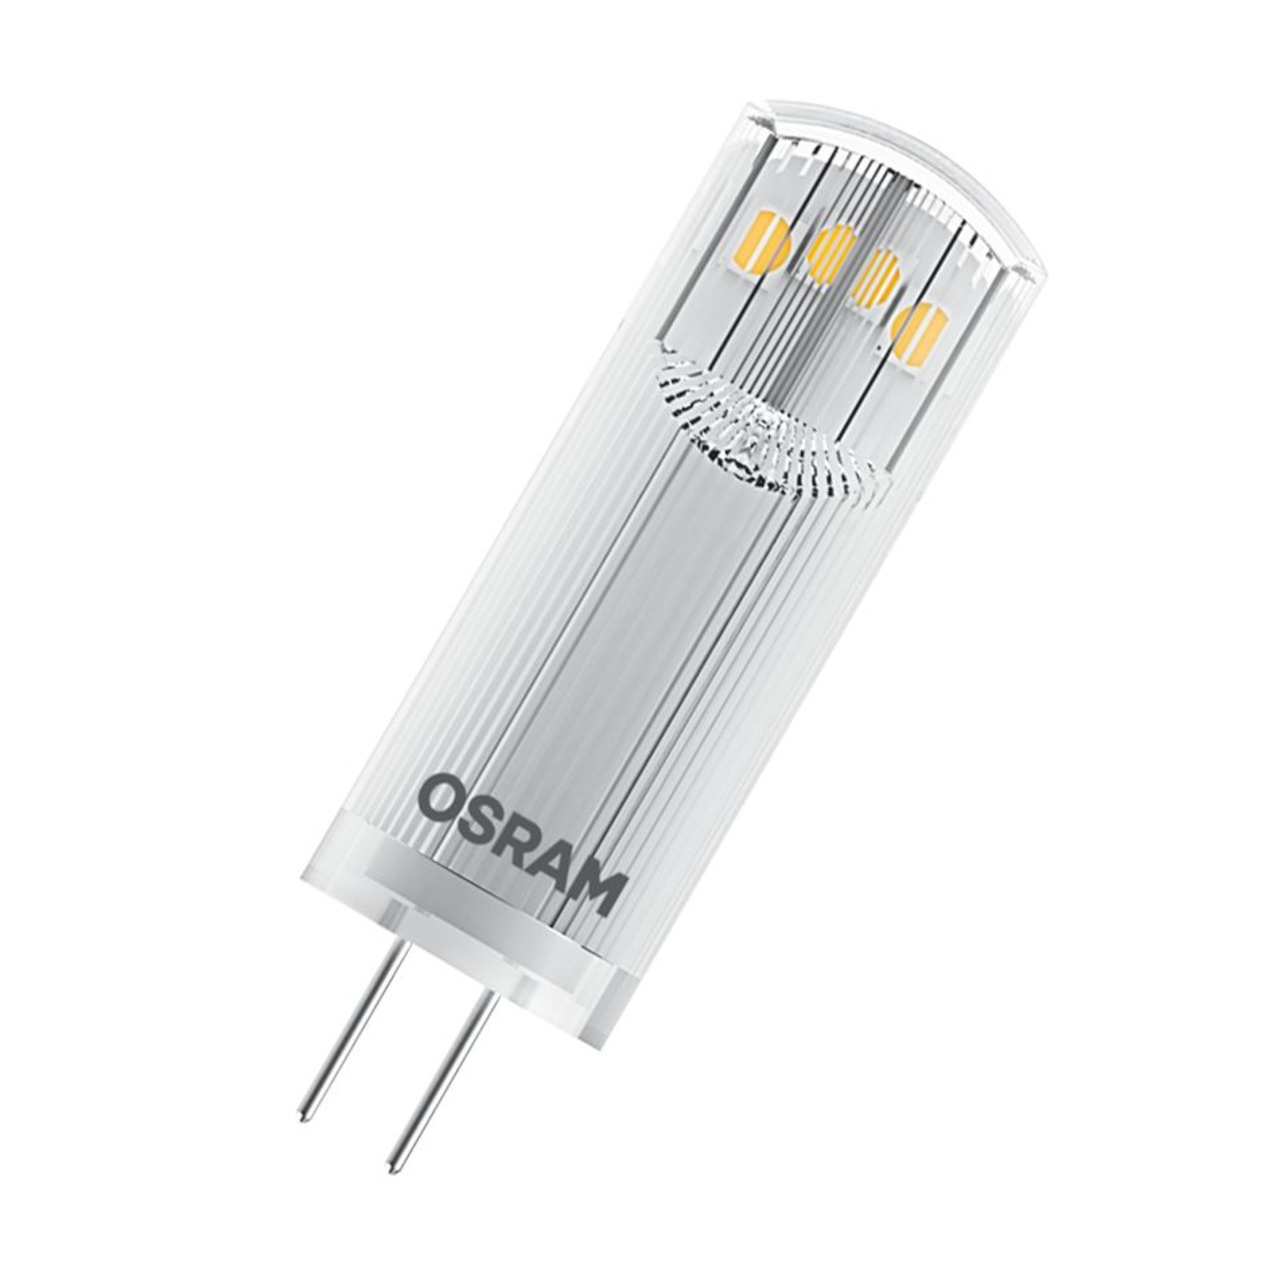 OSRAM 1-8-W-LED-Lampe T13- G4- 200 lm- warmweiss- 300- 12 V unter Beleuchtung